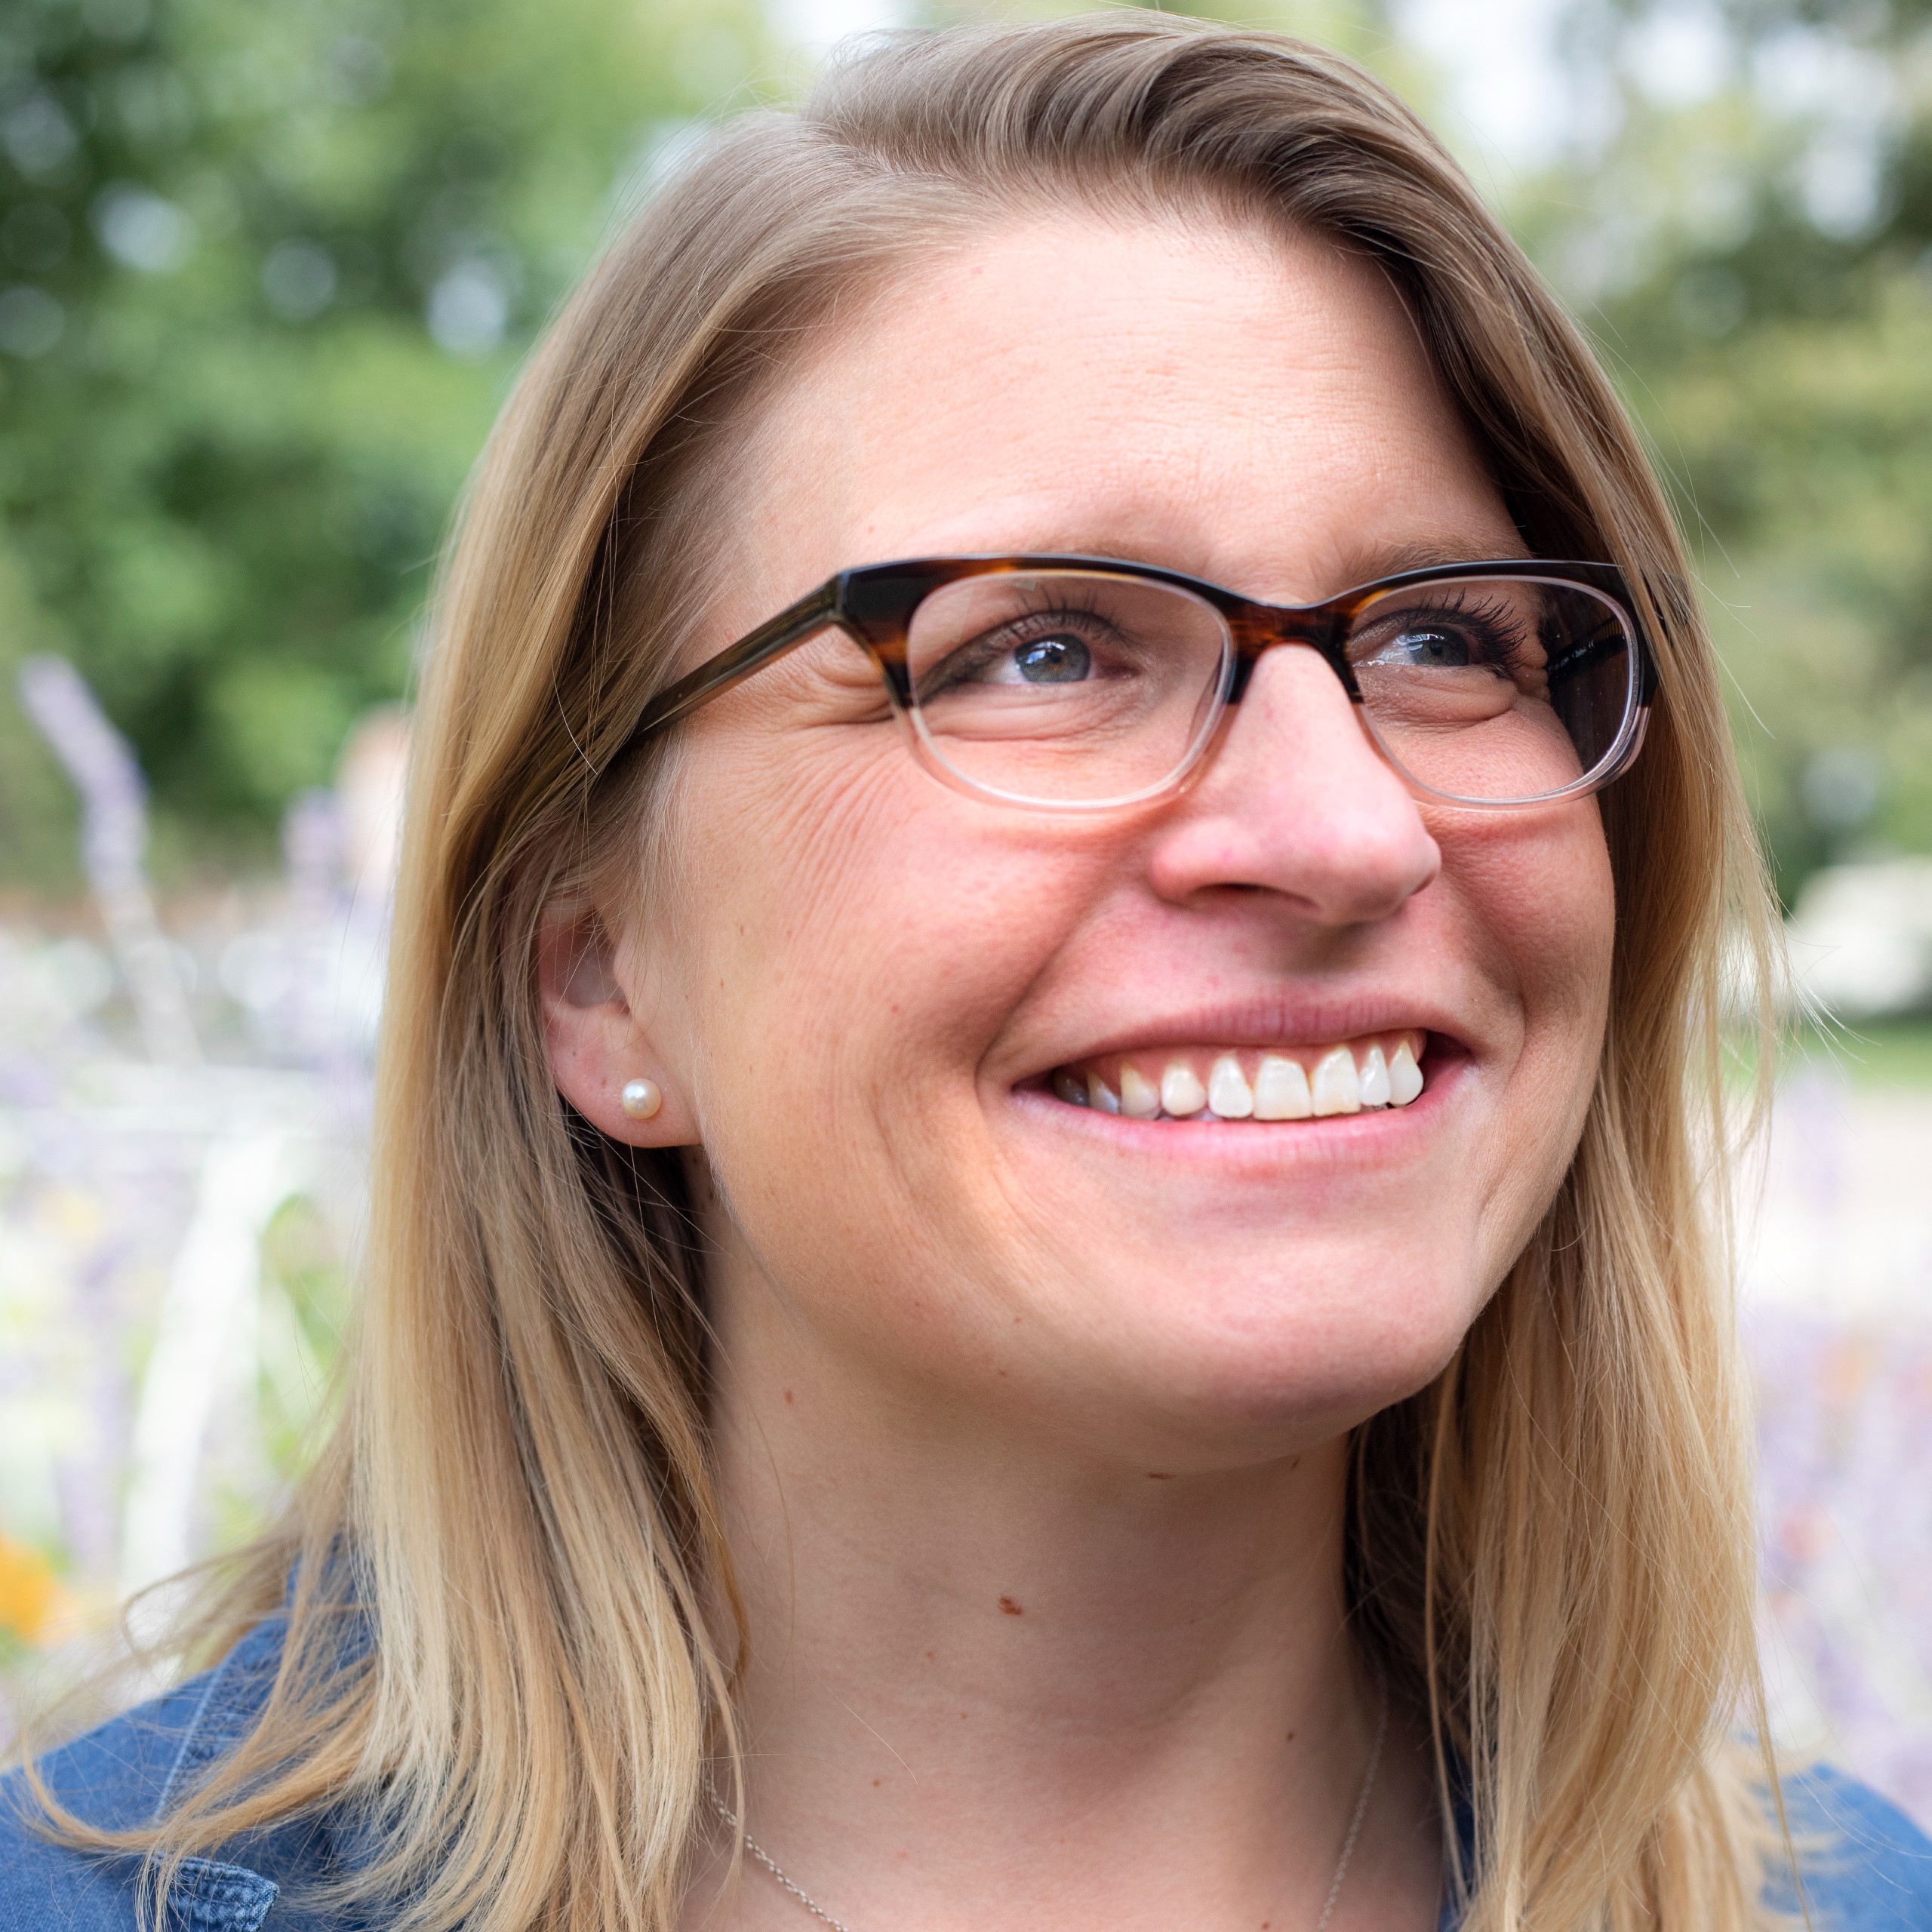 The National Science Foundation has awarded Colorado College Associate Professor of Environmental Science Rebecca Barnes and collaborators $844,435 for a project titled “Role of Soil Microbiome Resilience in Ecosystem Recovery Following Severe Wildfire.”